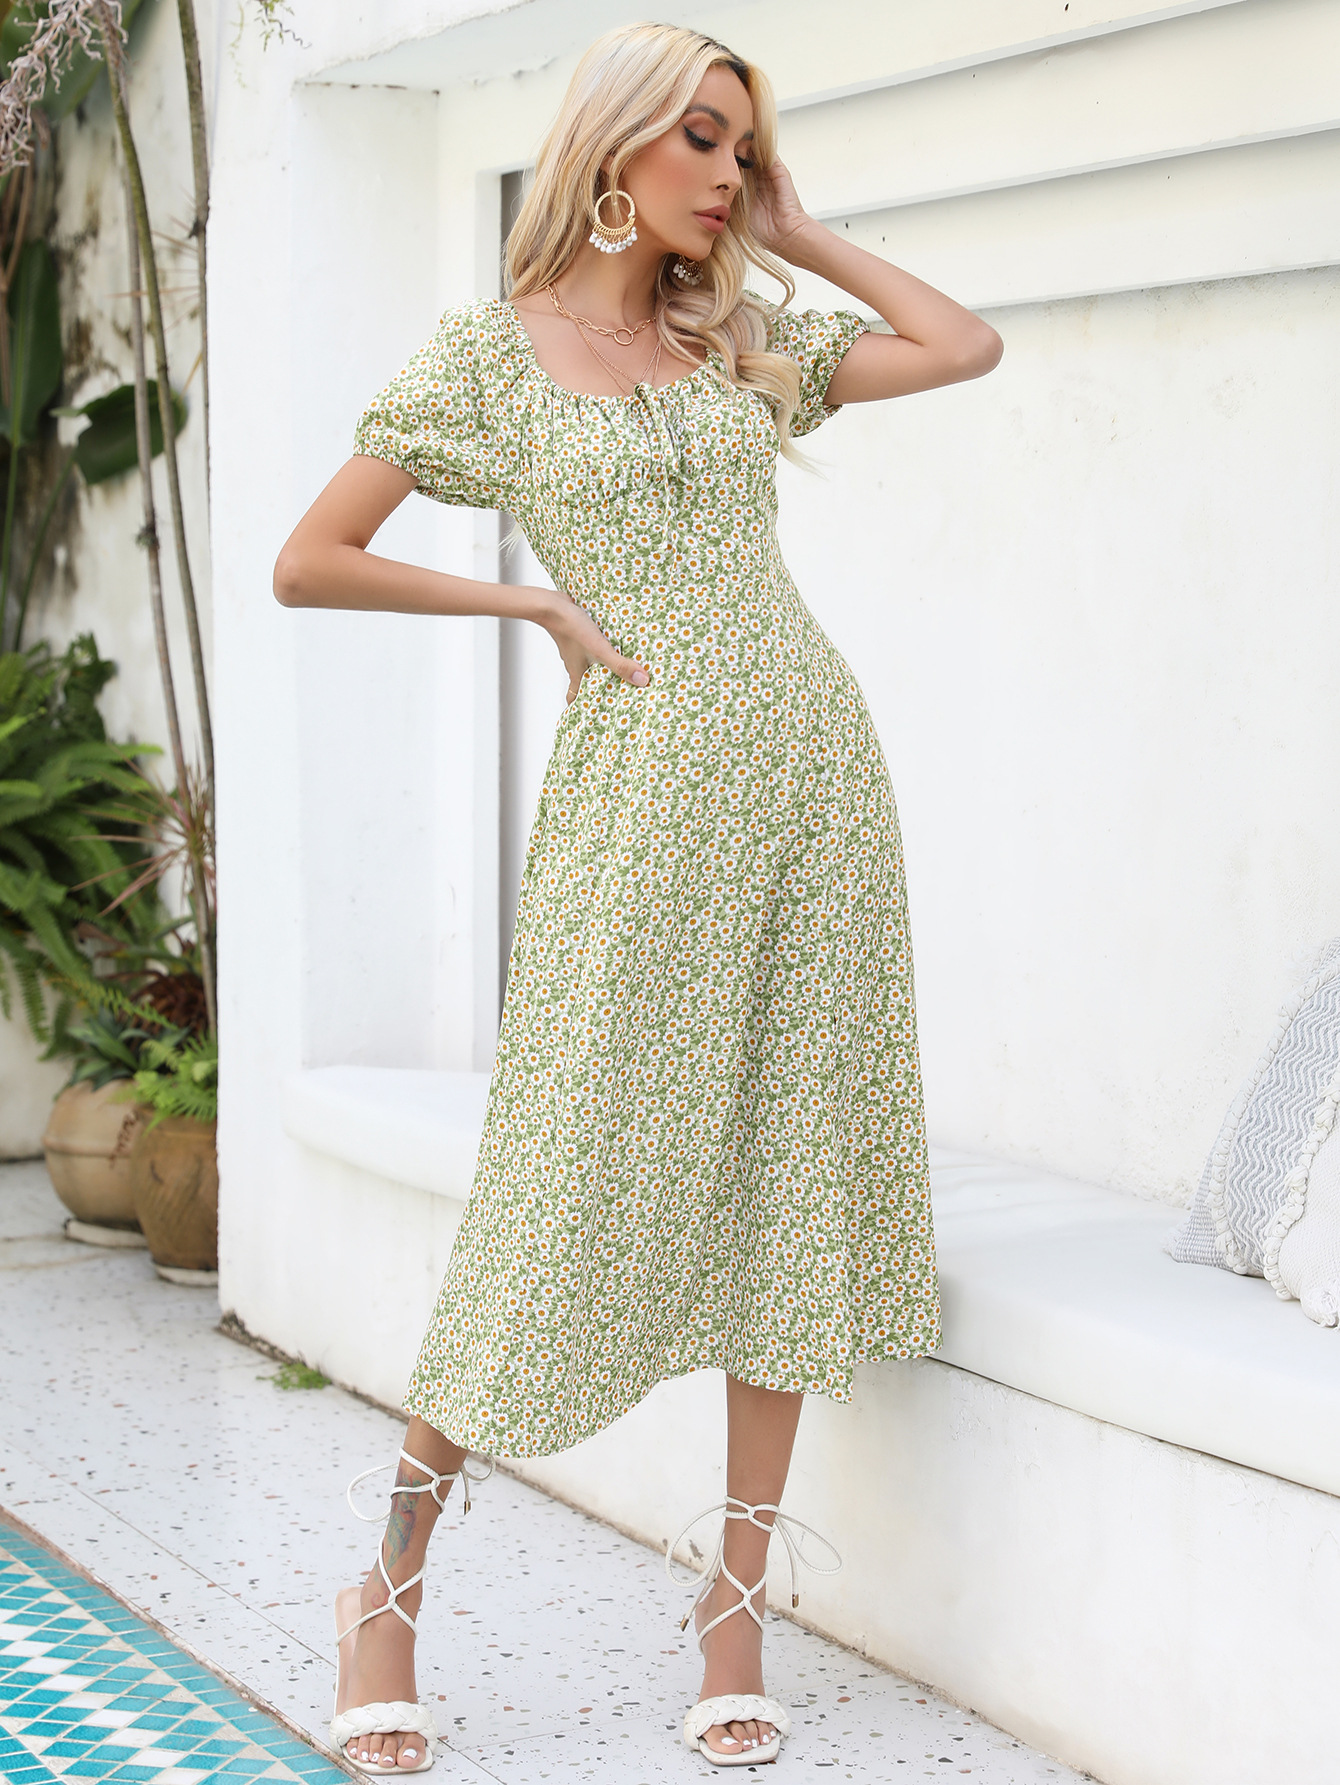 Spring Meadows Olive Green Floral Print Midi Dress, 53% OFF